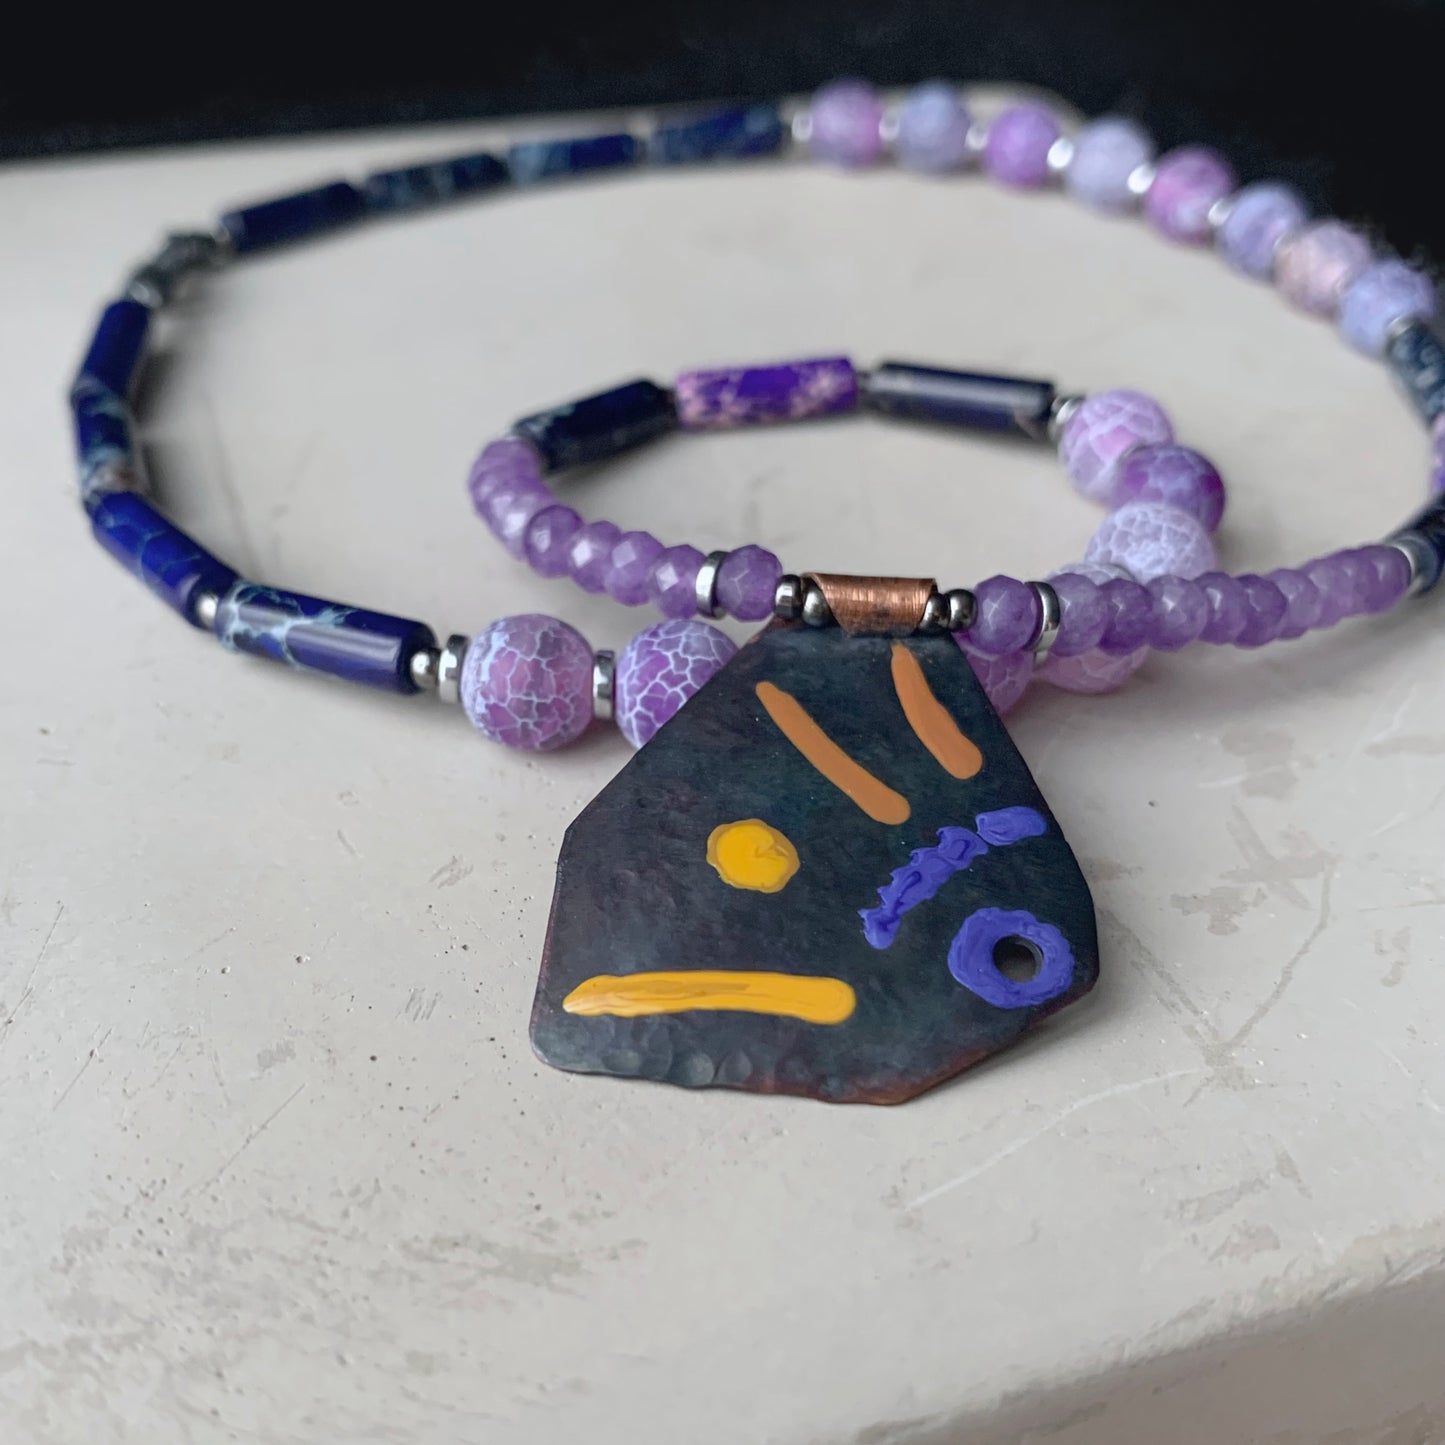 Necklace with gemstones and copper pendant 'Life on the Reef - Purple, Garnet and Ochre'